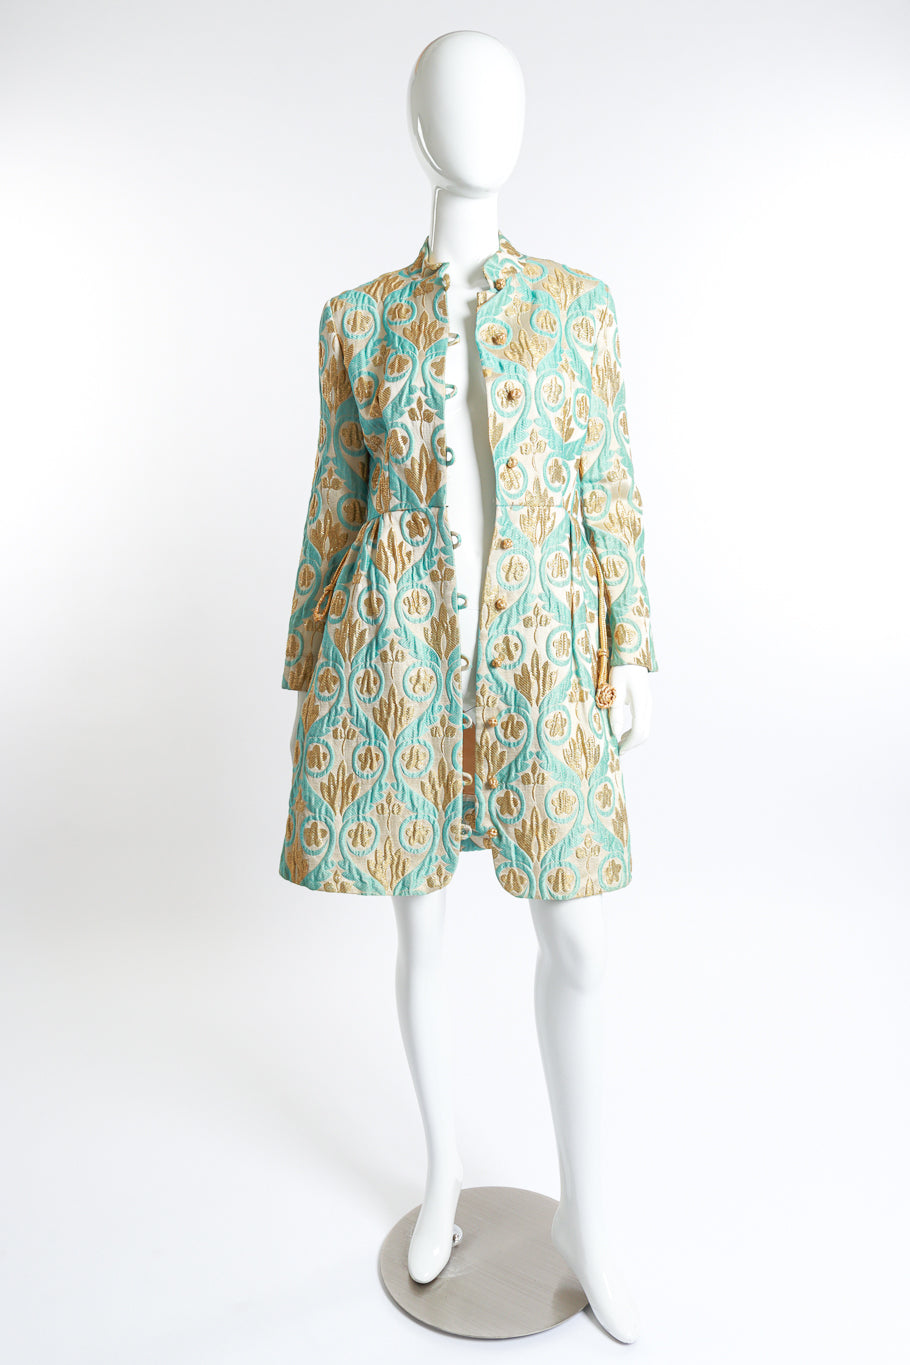 Vintage Victor Costa gold lurex floral embroidered evening coat as worn open on mannequin @RECESS LA